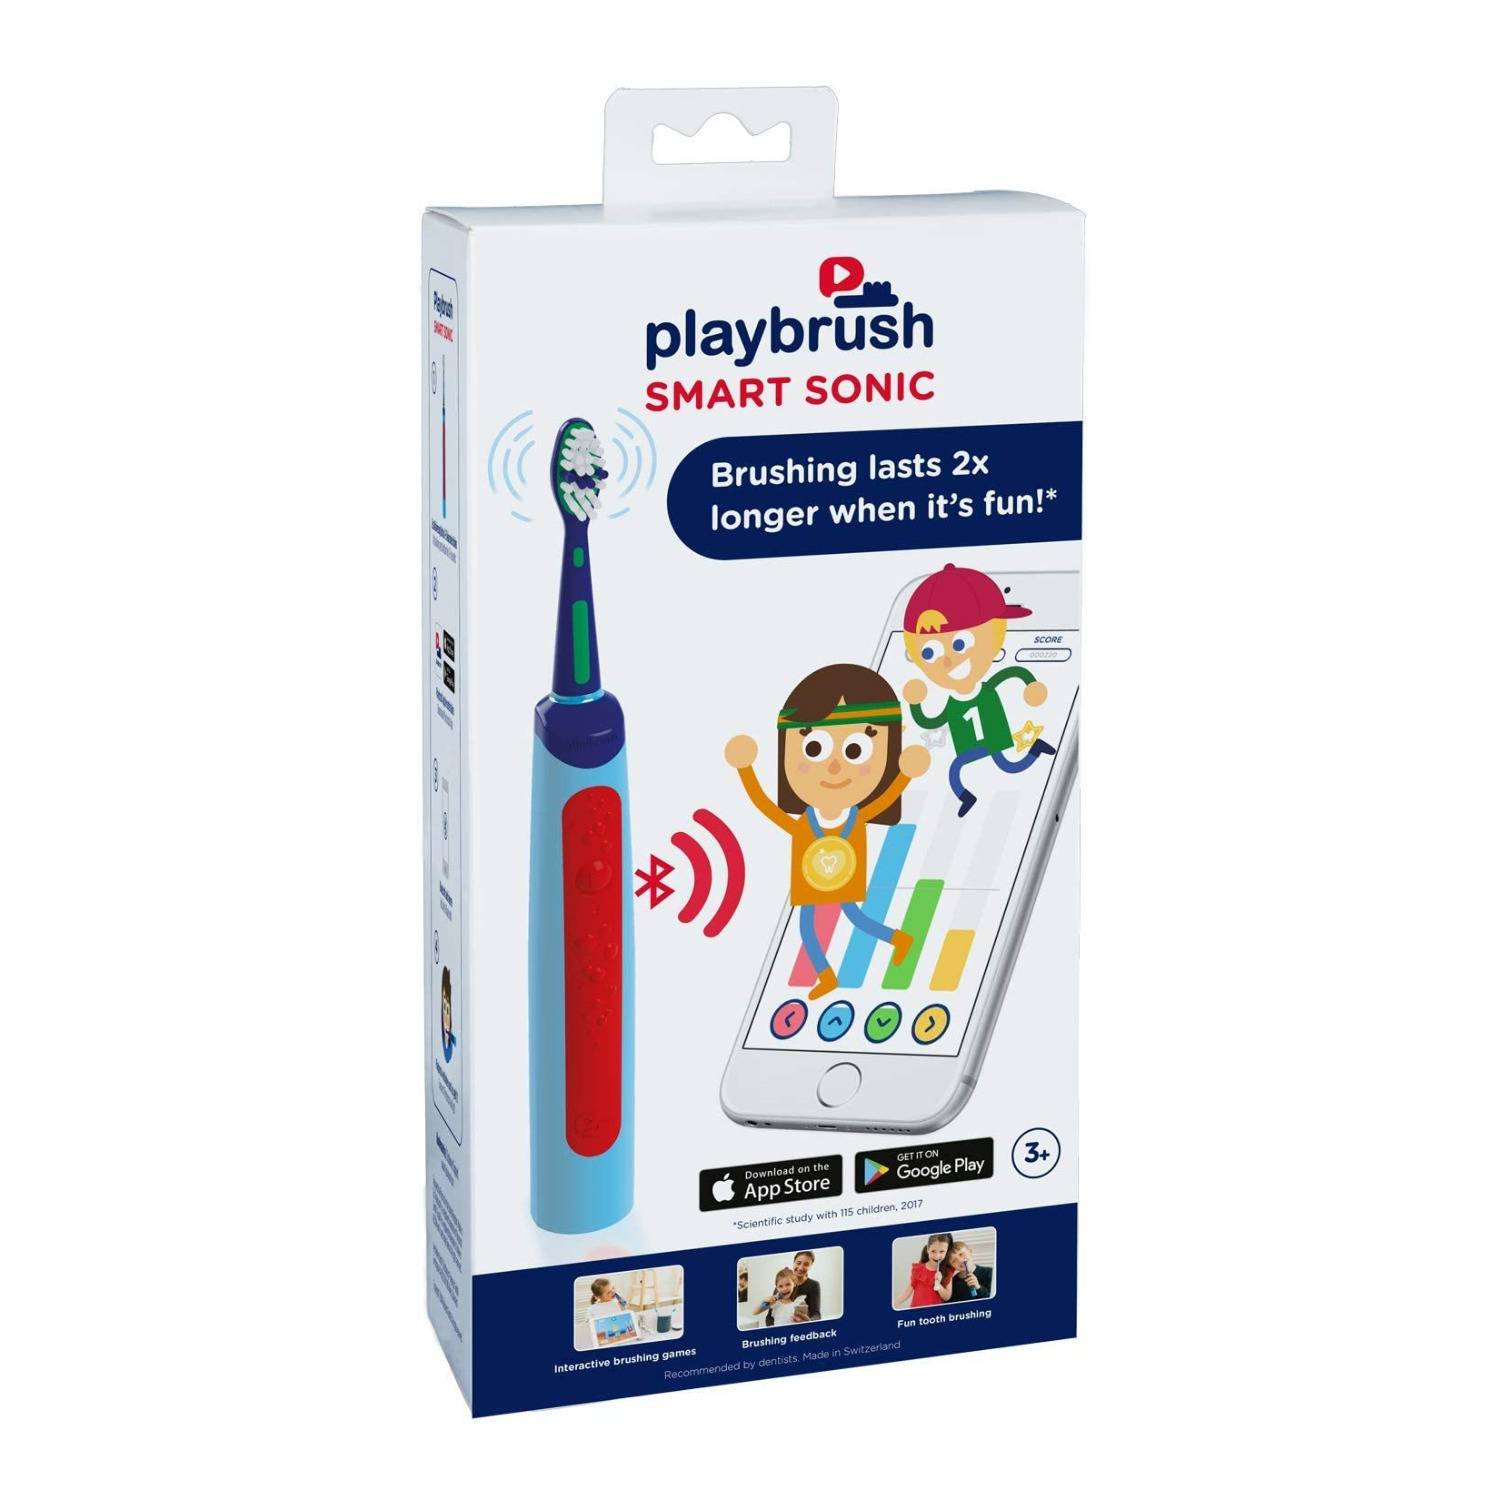 Playbrush Smart Sonic Kids Electric Toothbrush (Blue/Red)